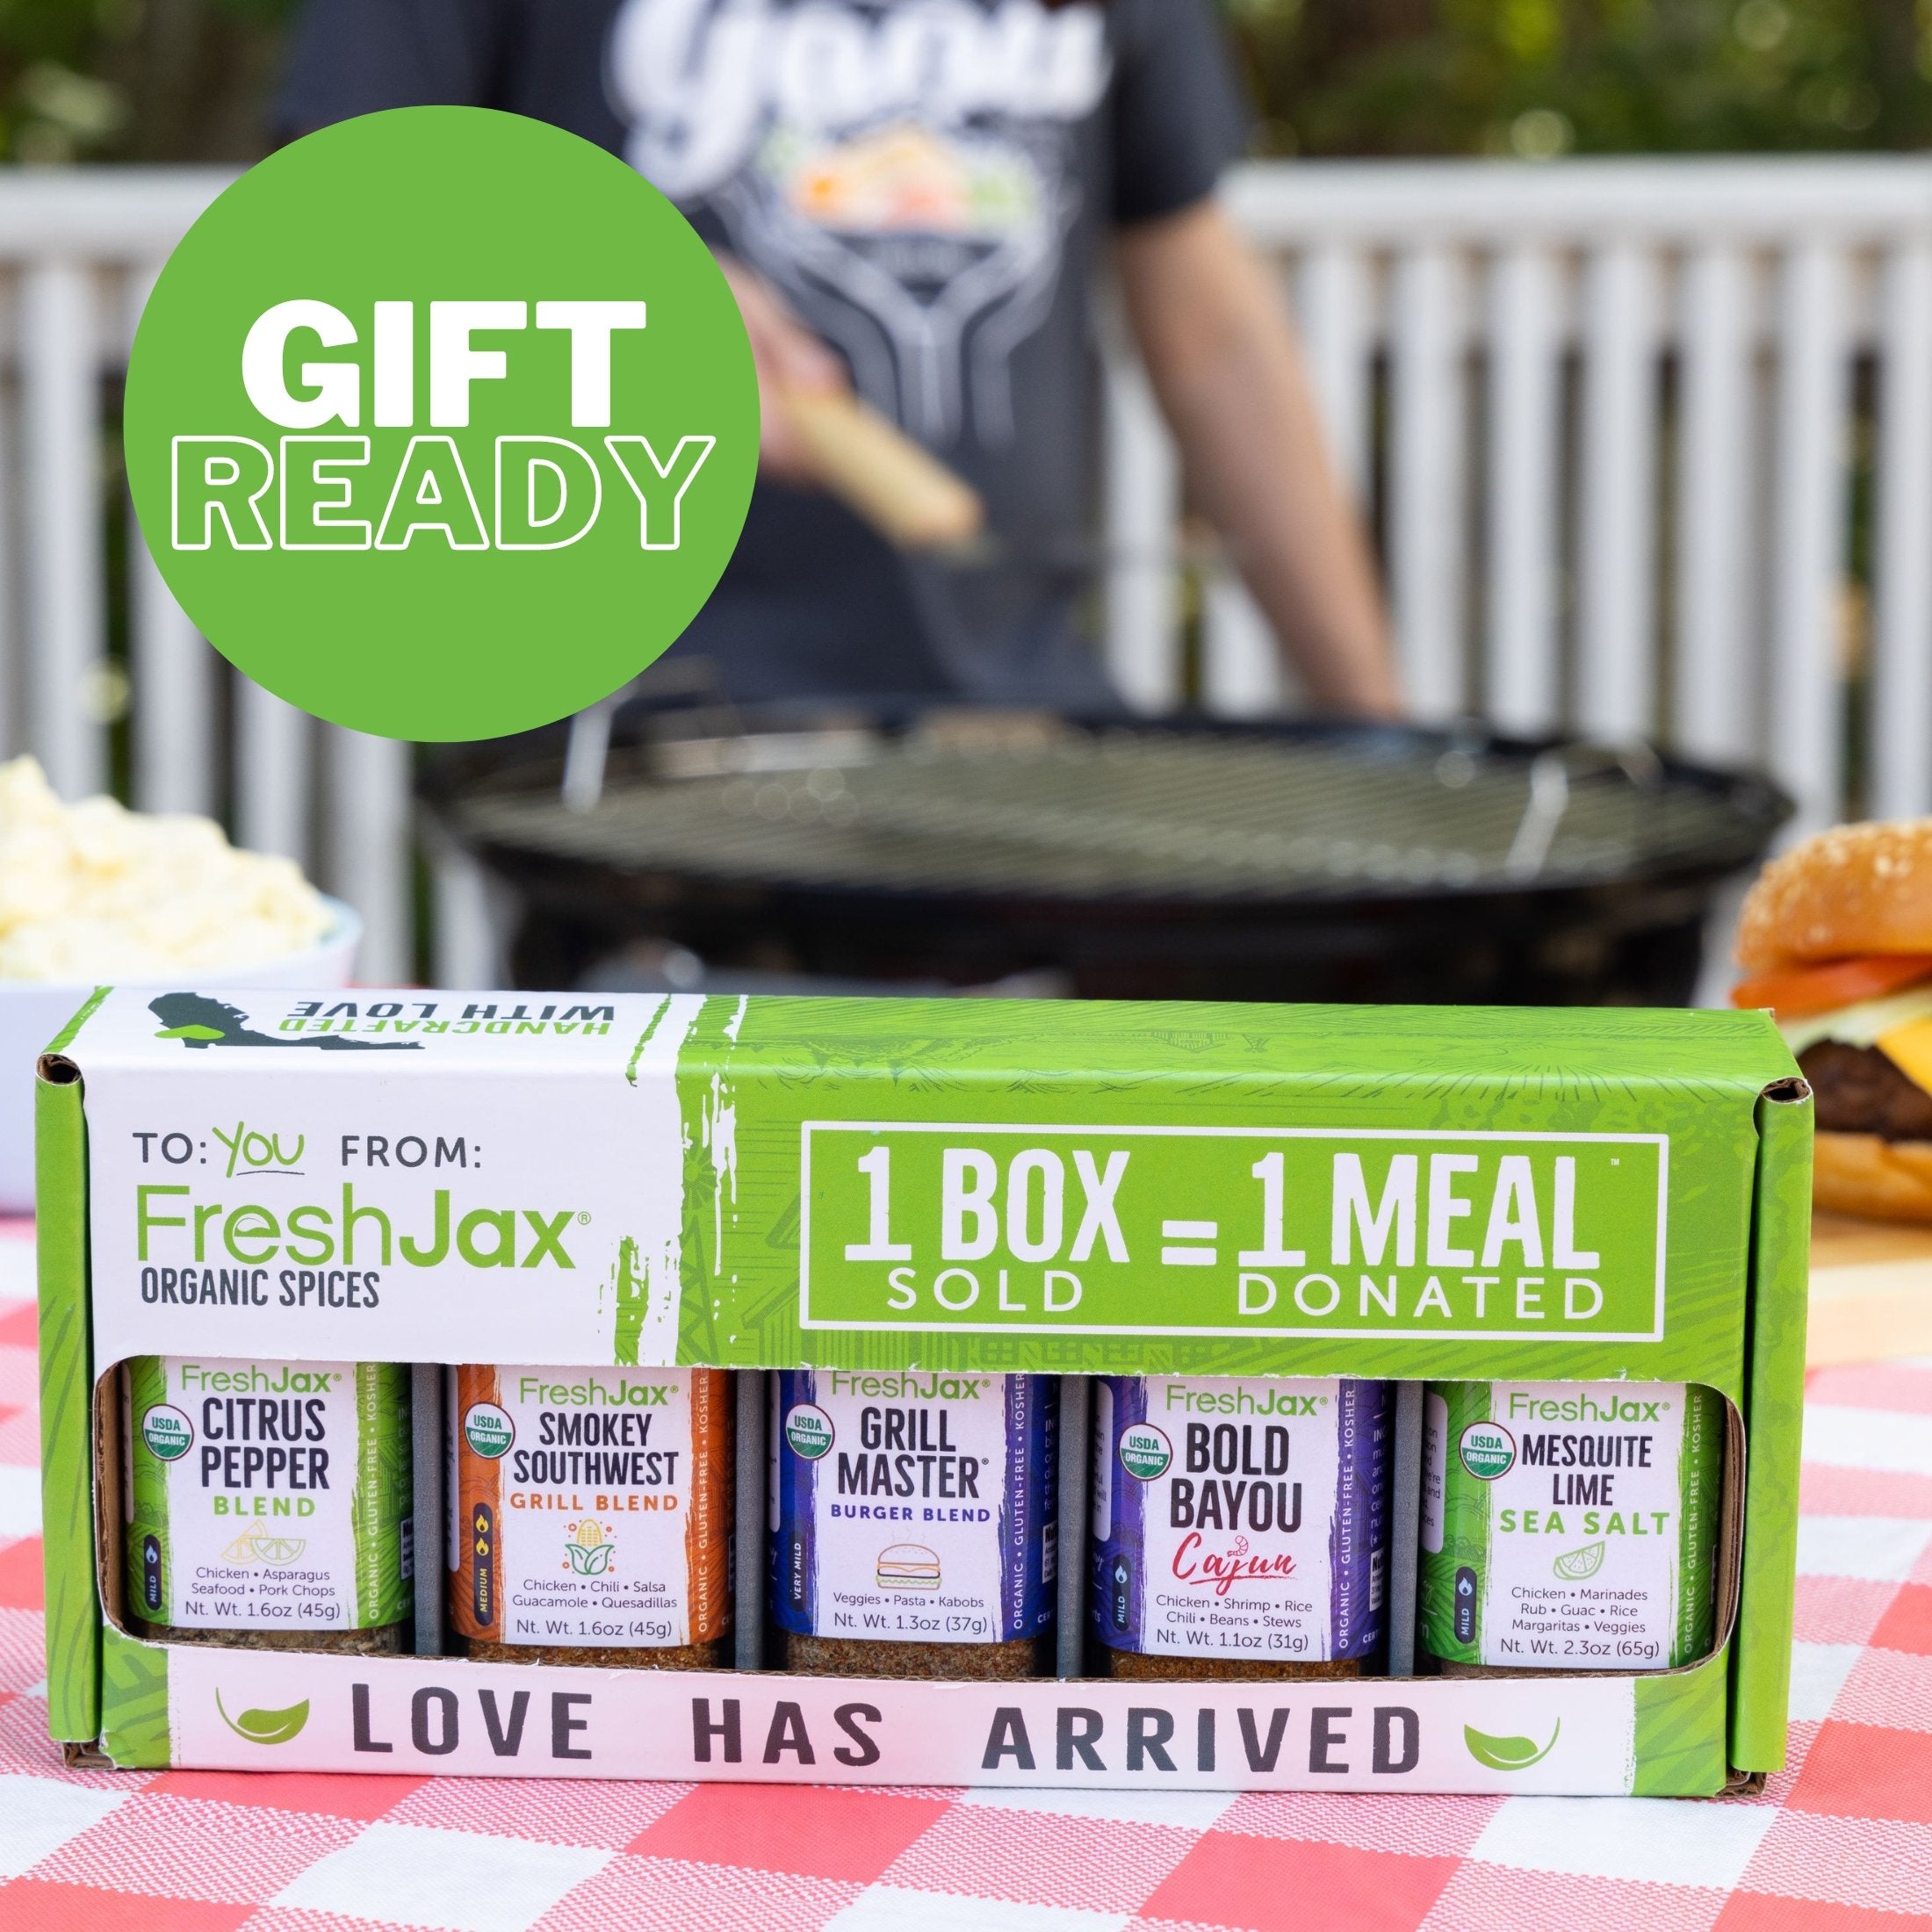 BBQ-Themed Gifts Sets : Grill Master Crate